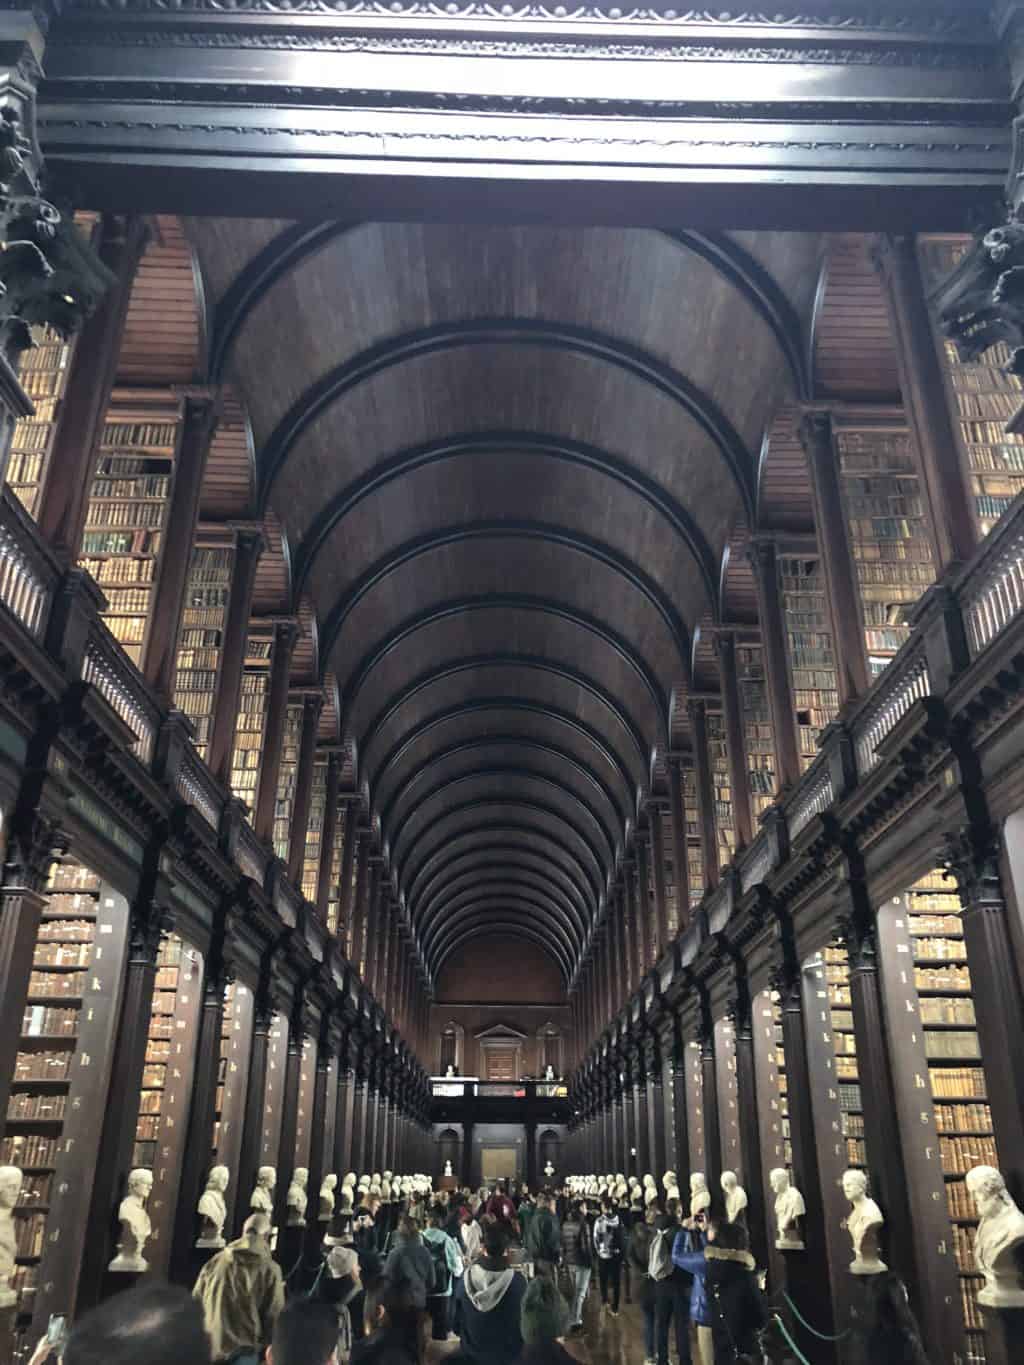 The Trinity college Library